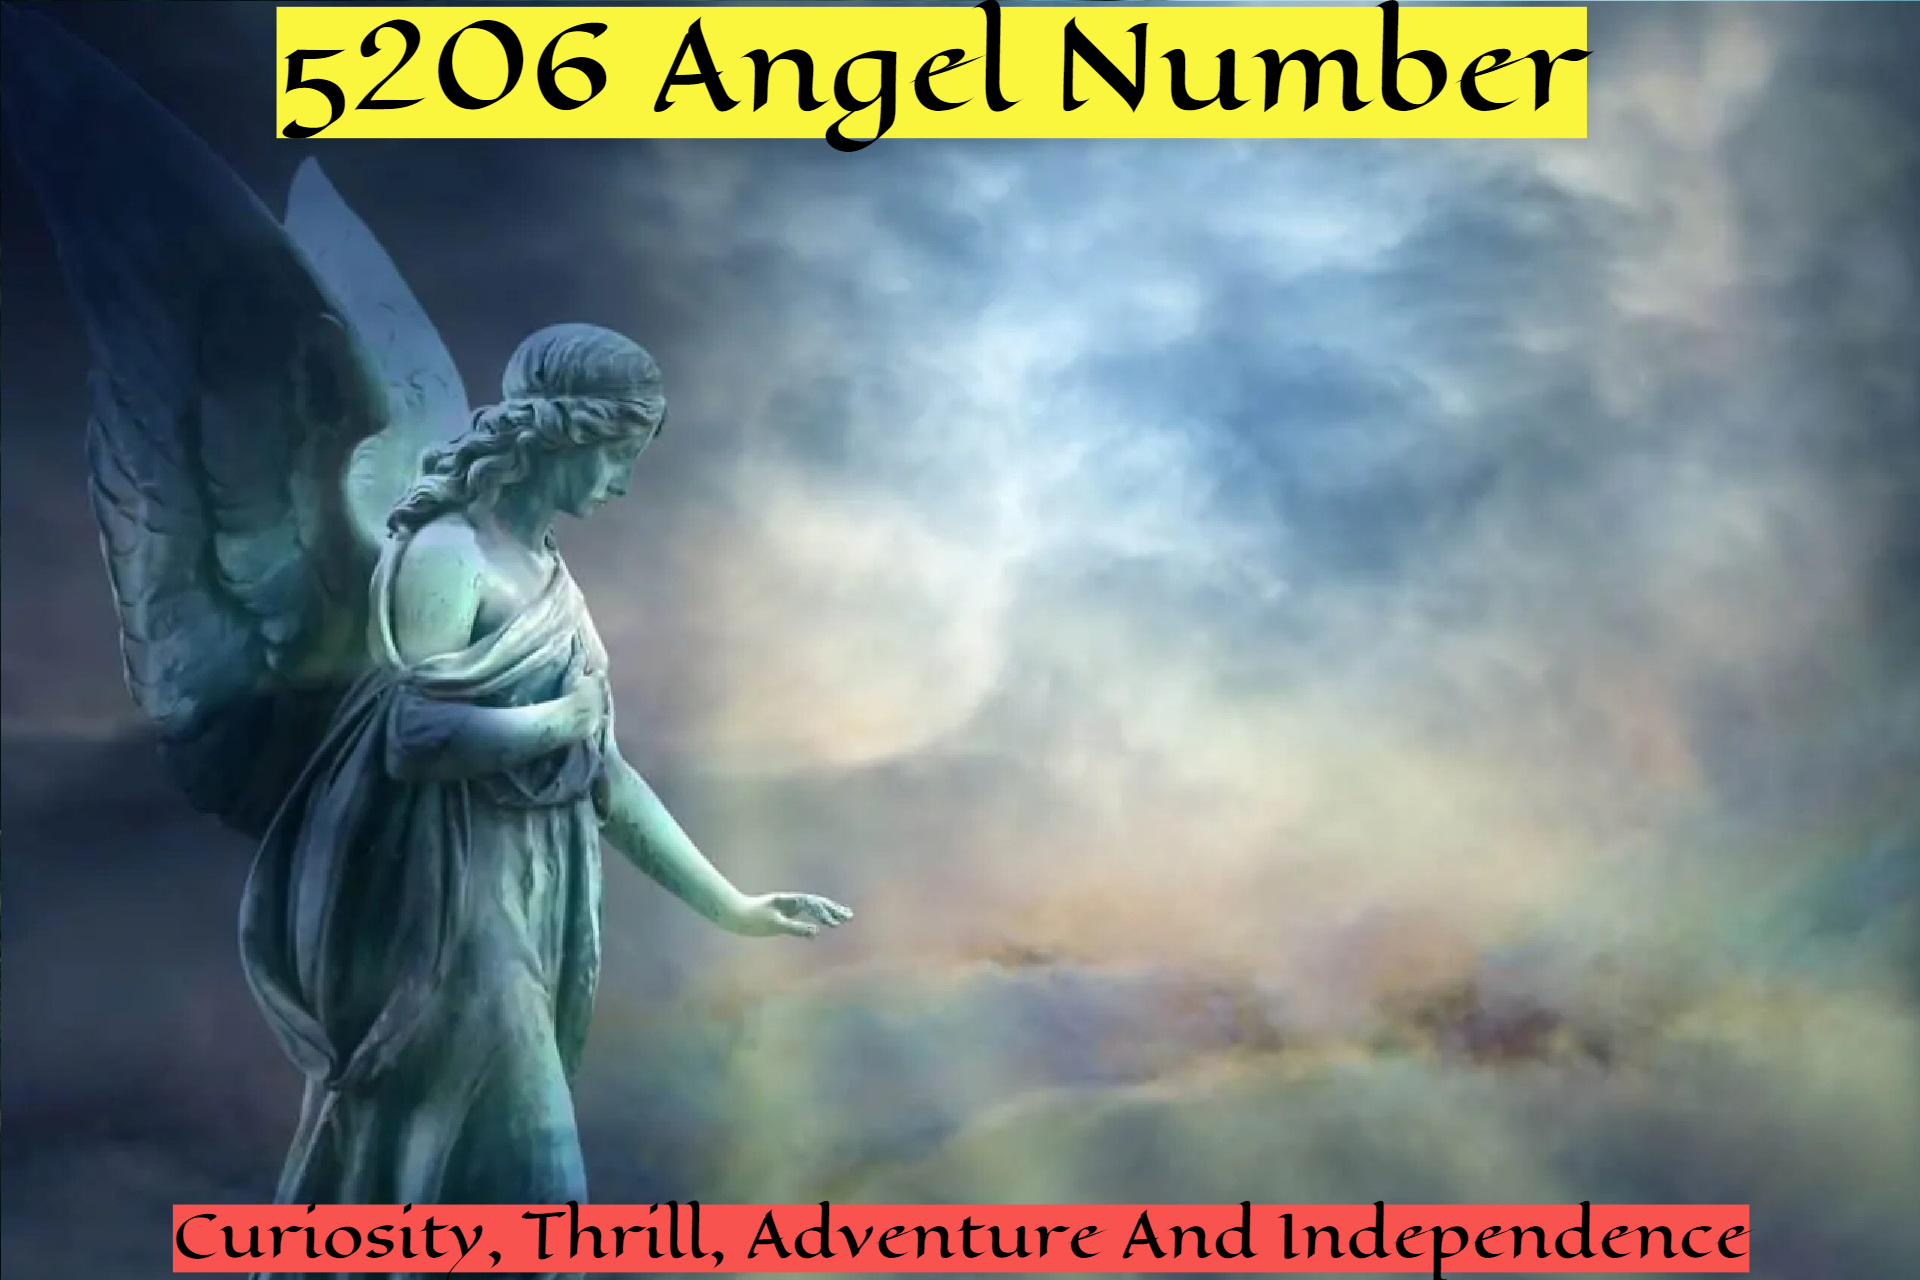 5206 Angel Number - Signifies Positive Change